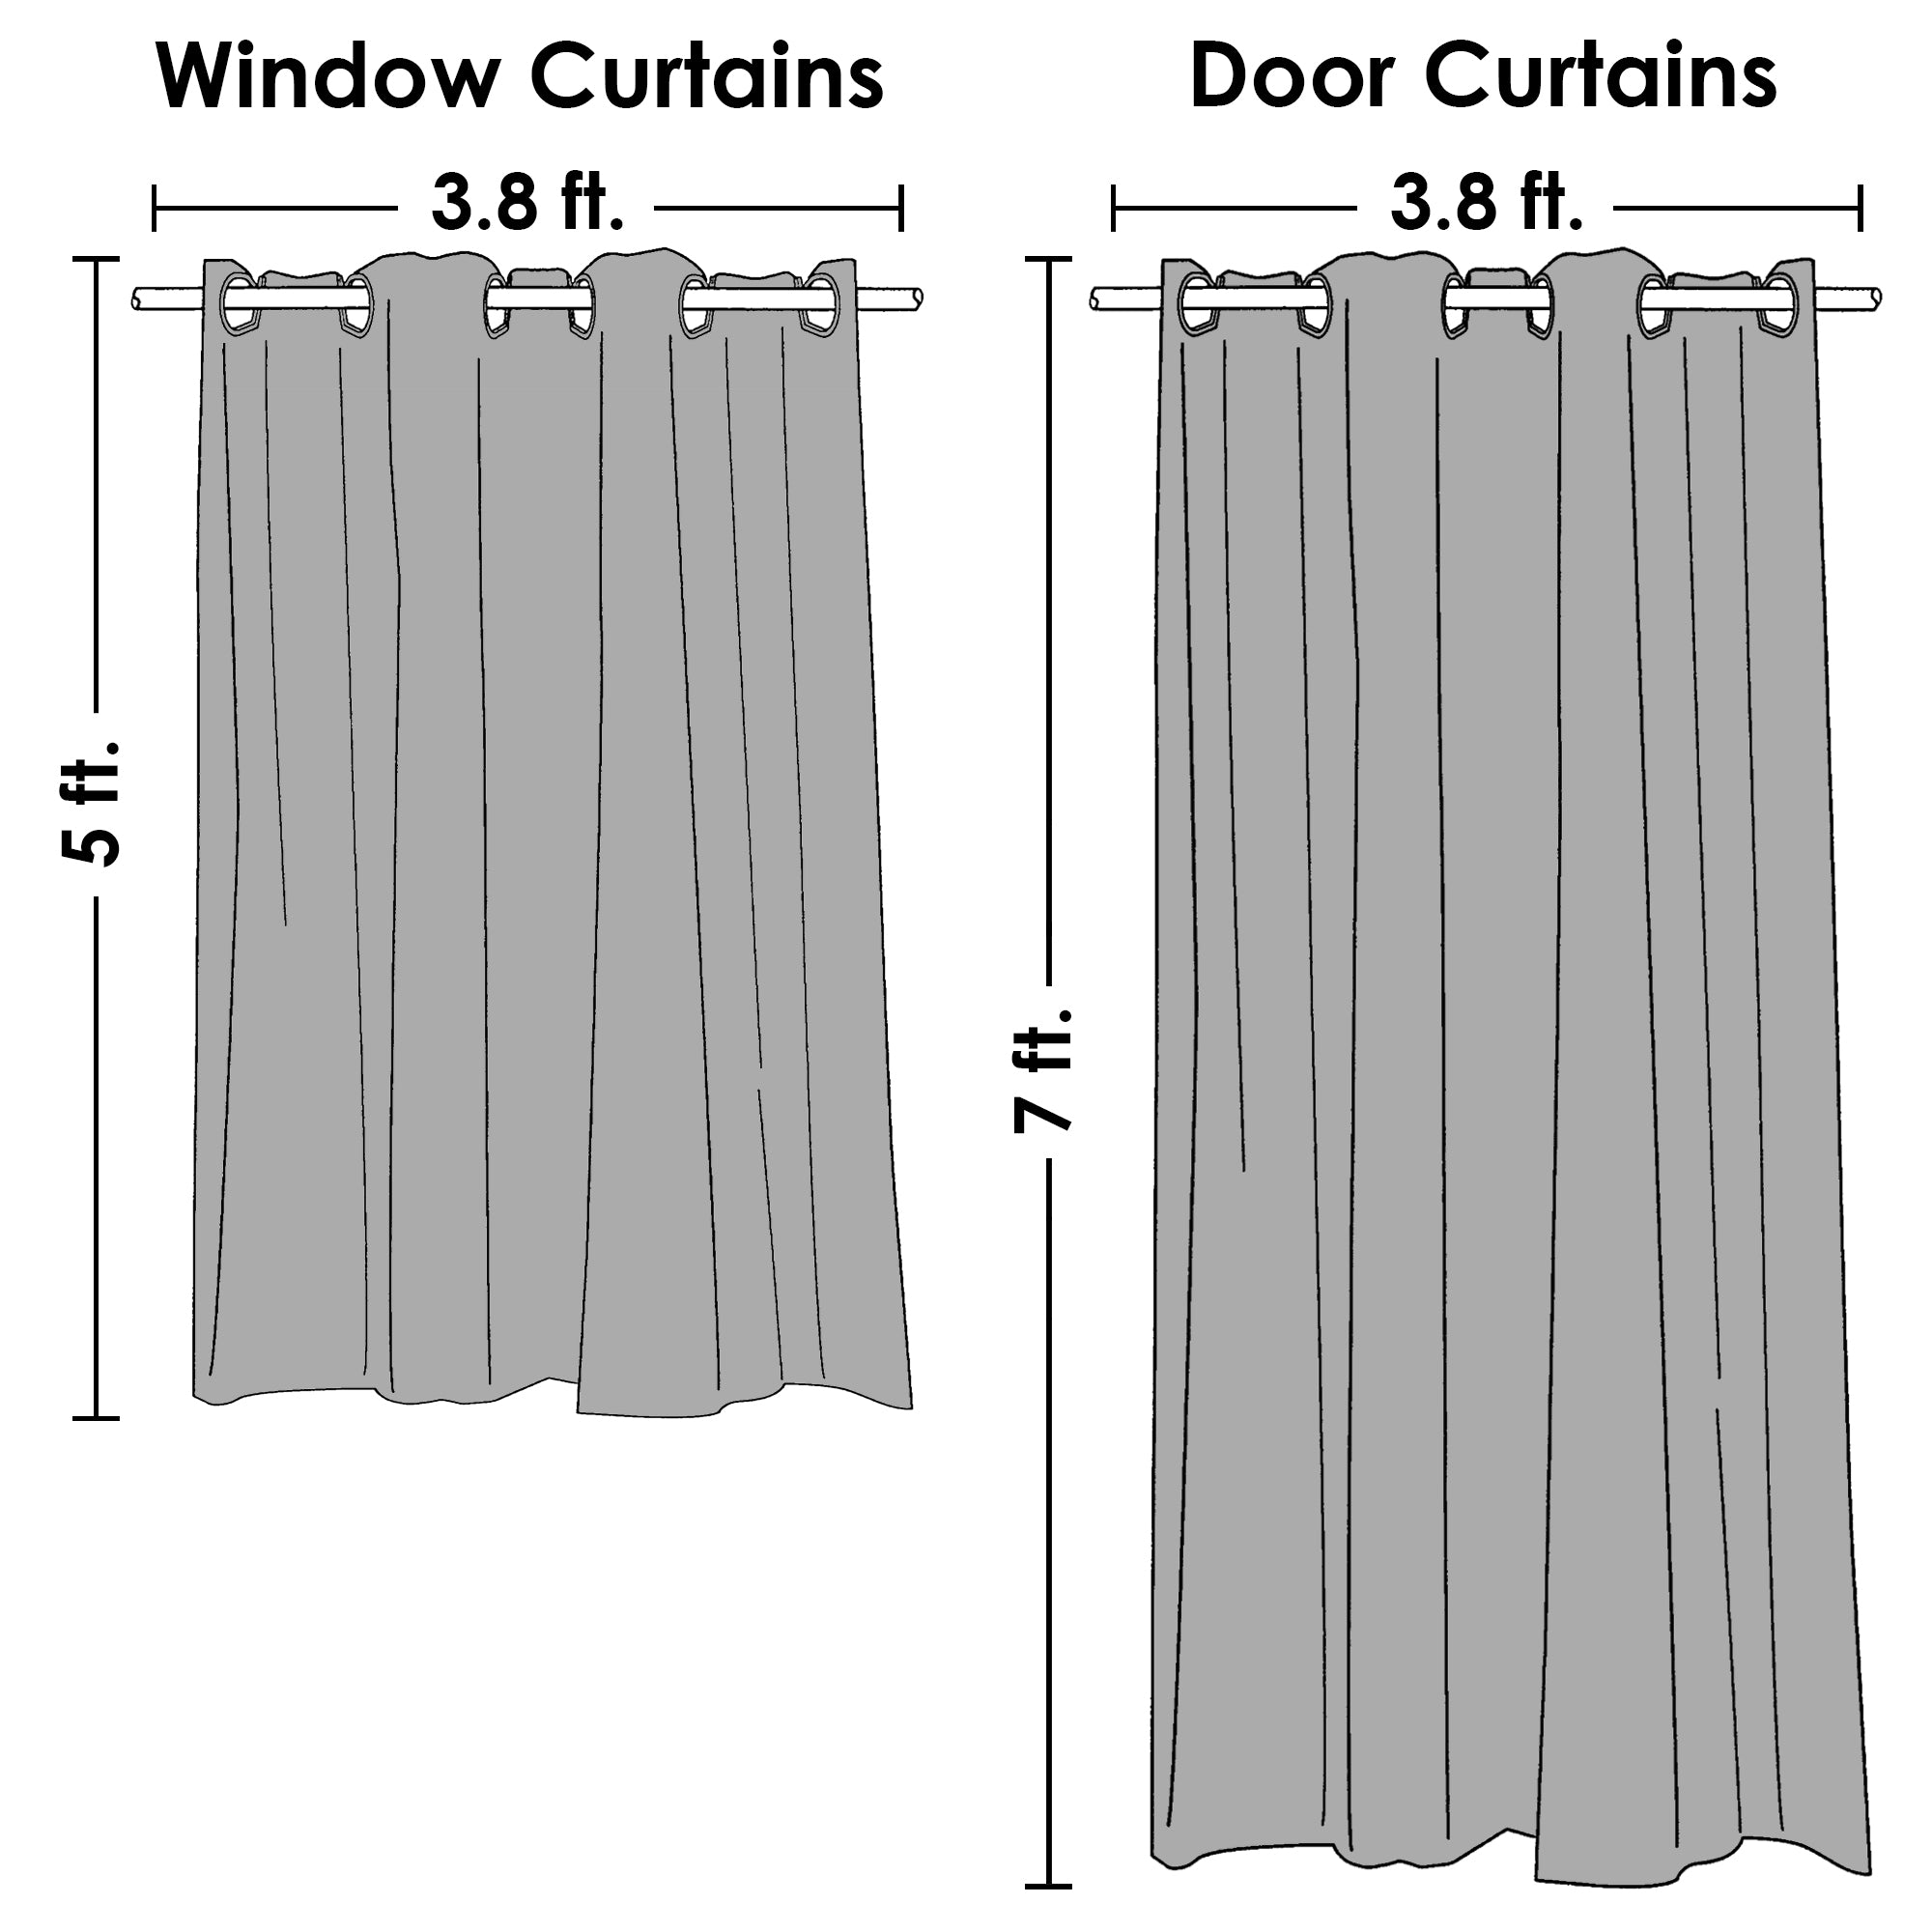 Know Your Curtains Before Buying! – StoryAtHome.com